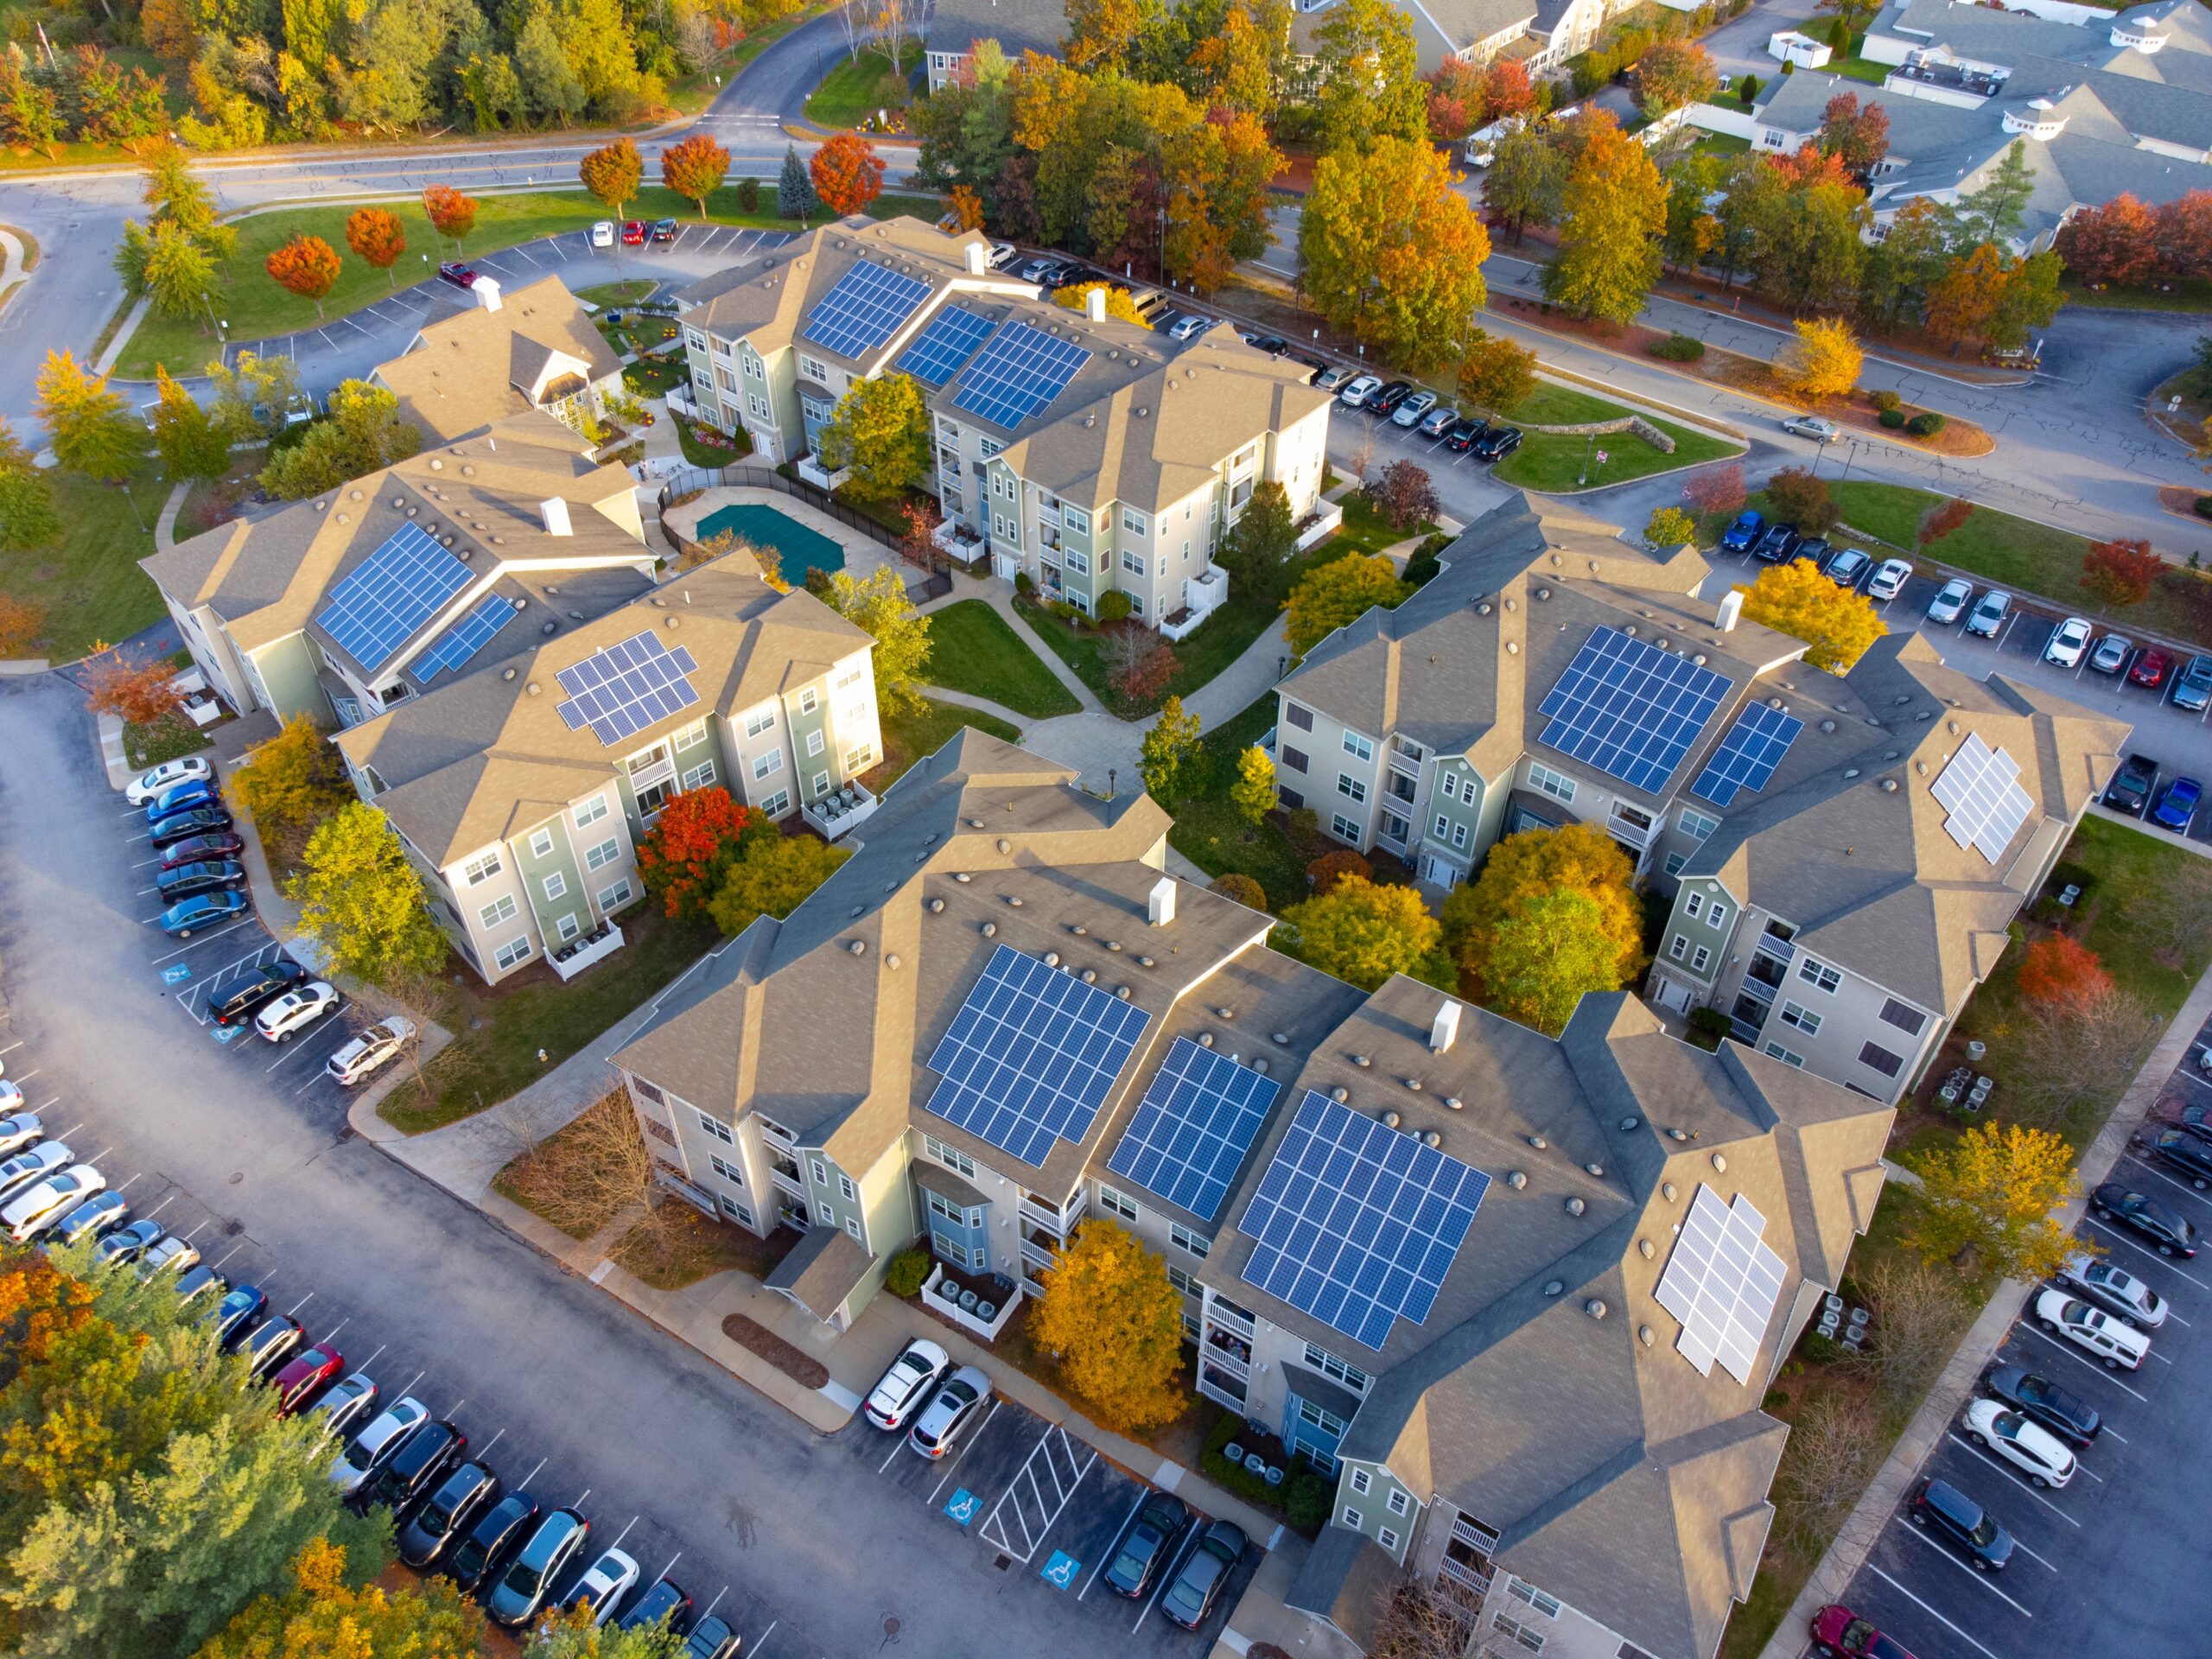 Aerial,View,Of,Apartment,Buildings,With,Solar,Panel,Installed,On